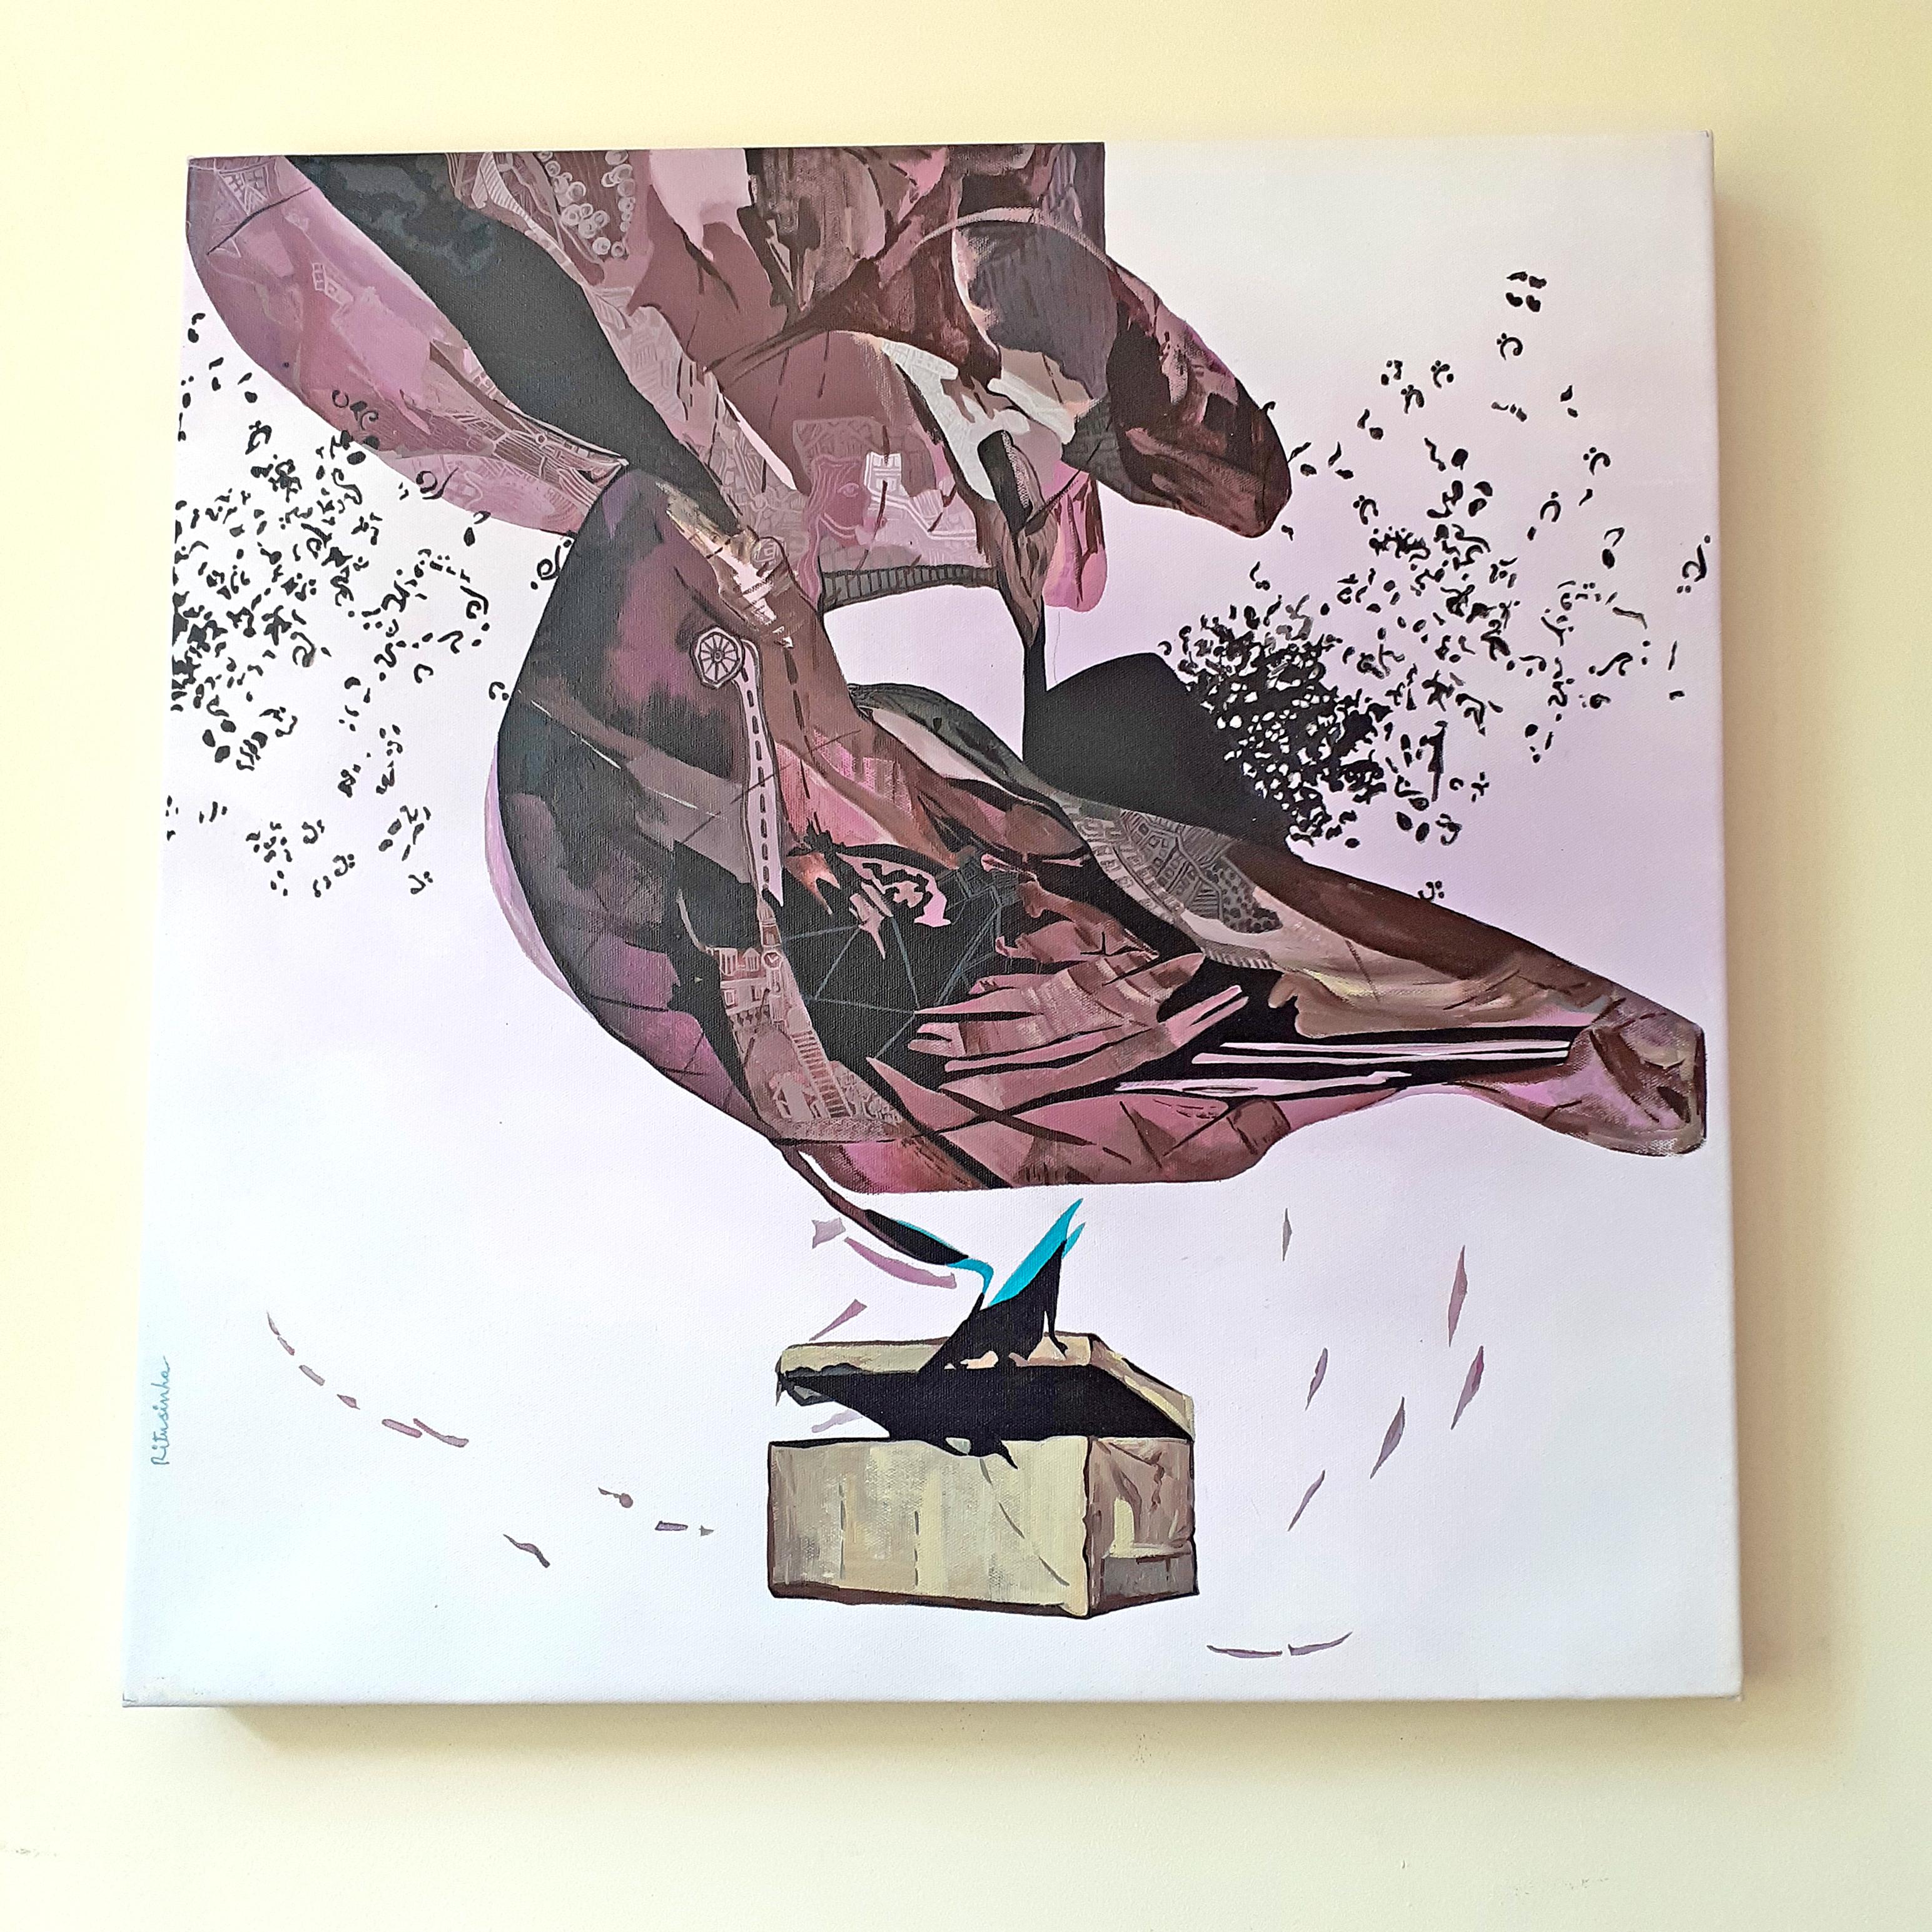 I Believe I Can Fly -Incredible 5 Panel Painting in Pink + Grey by Indian Artist For Sale 11